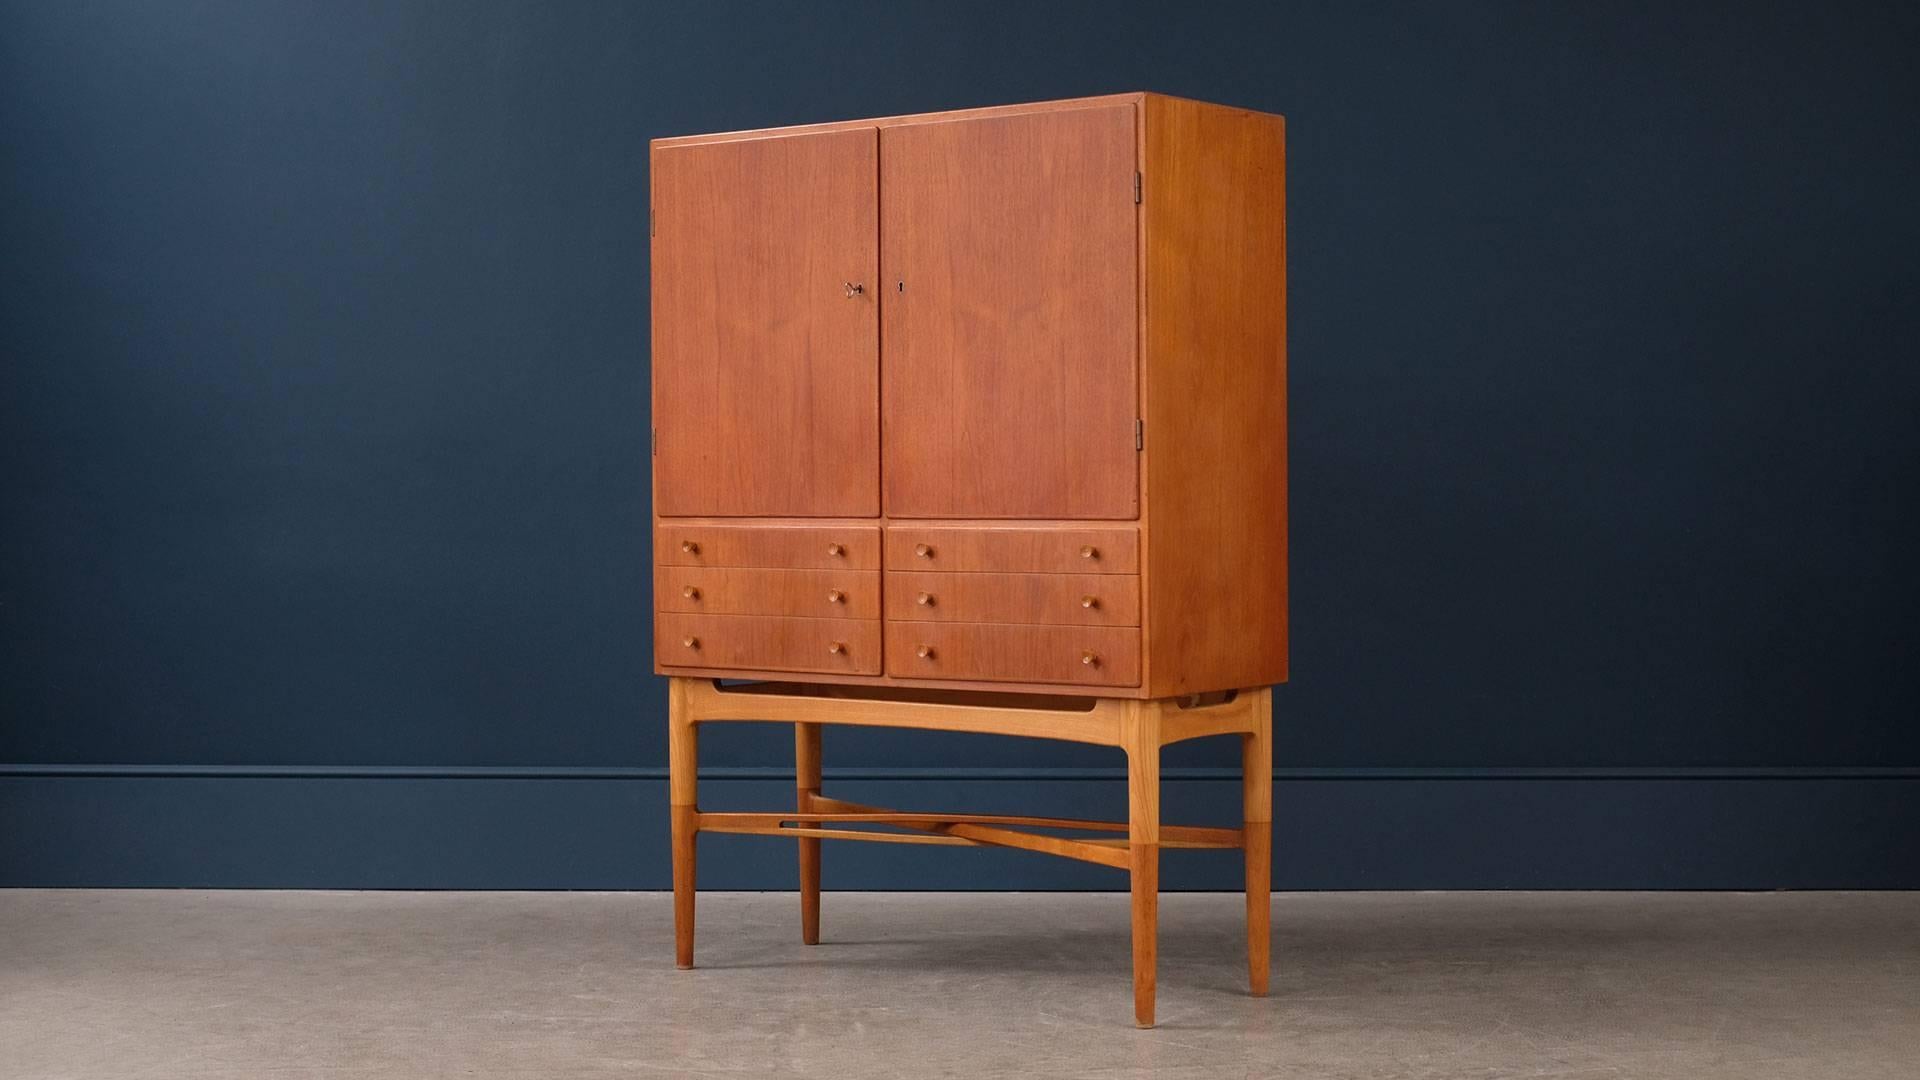 Ultra high quality and super elegant Swedish cabinet in teak with contrasting ash legs. Beautiful piece of Scandinavian design with amazing details – the stretcher is wonderful.